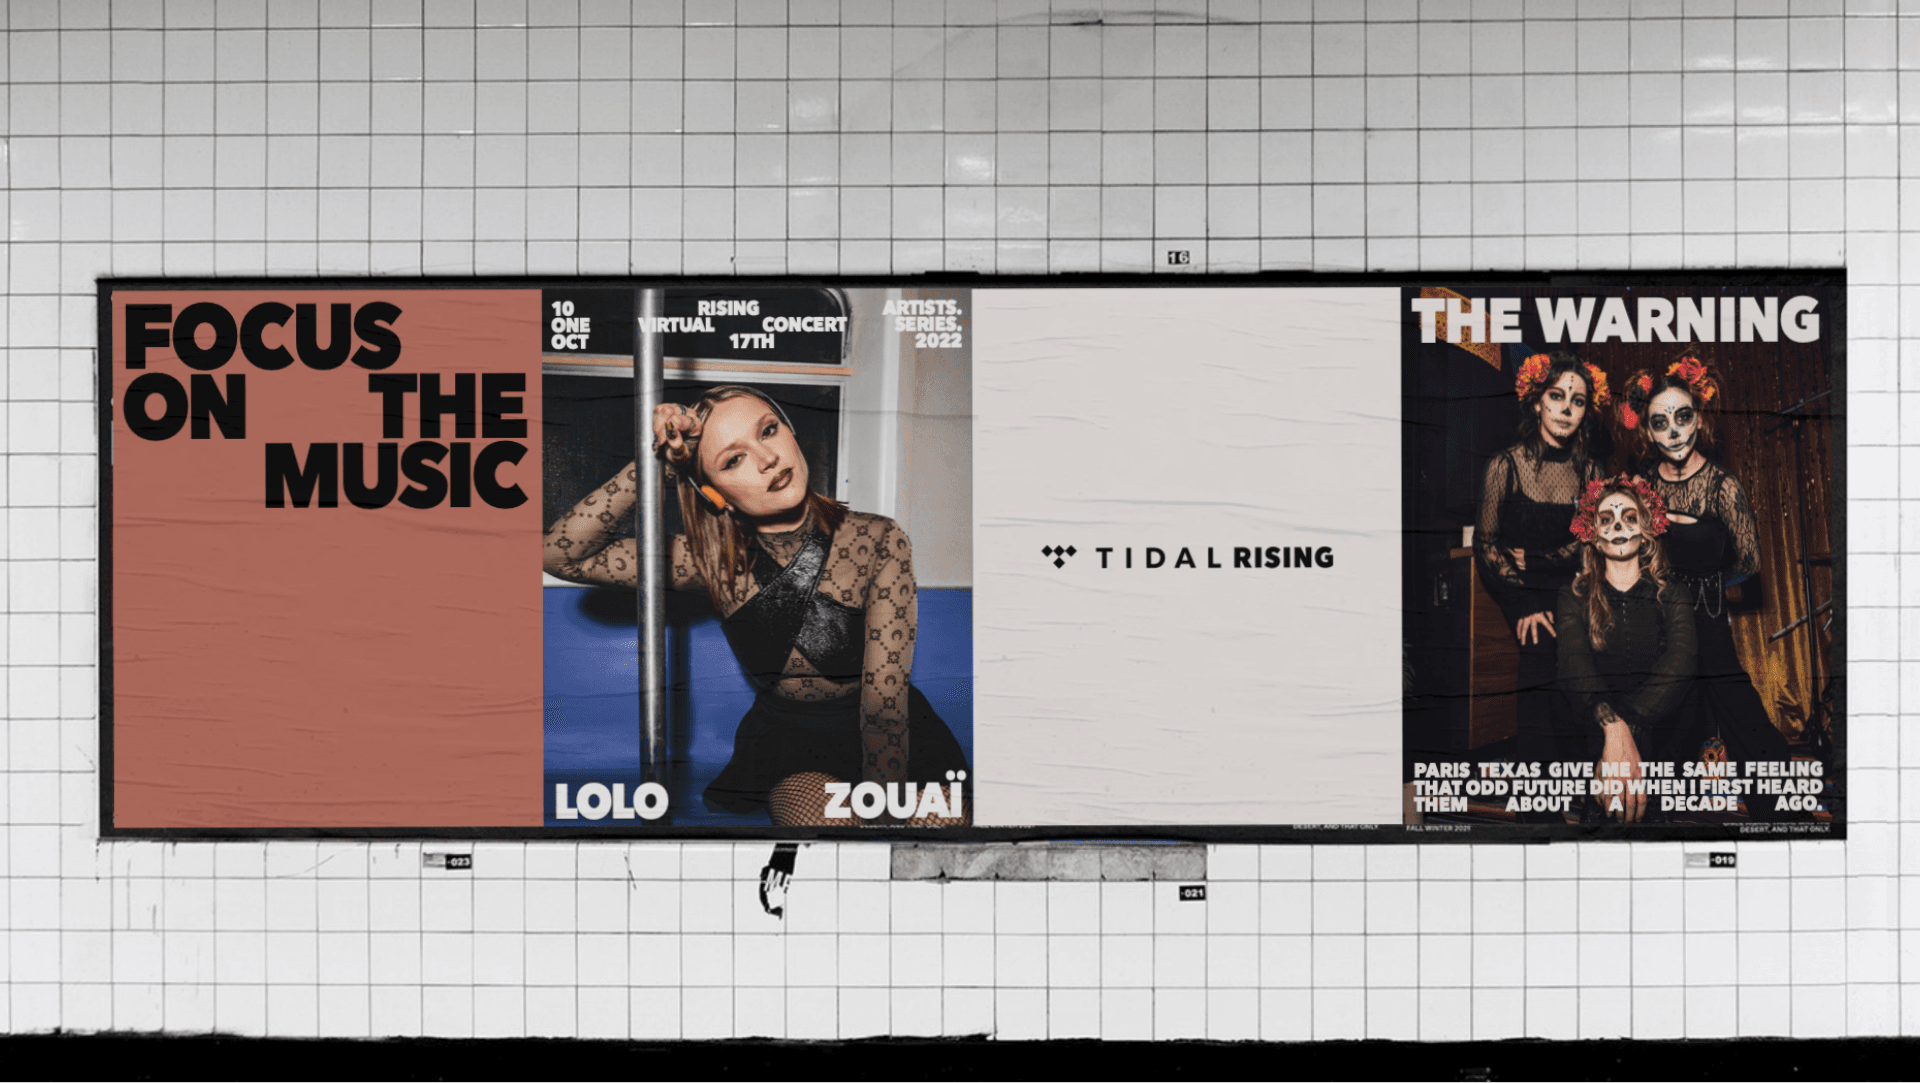 Subway tile wall with four frame Tidal Rising poster. Focus on the music. Lolo Zouai 10 Rising artists. one virtual concert series. Oct 17th 2022. Tidal Rising. The Warning. Paris Texas give me the same feeling that odd future did when if I first heard them about a decade ago.